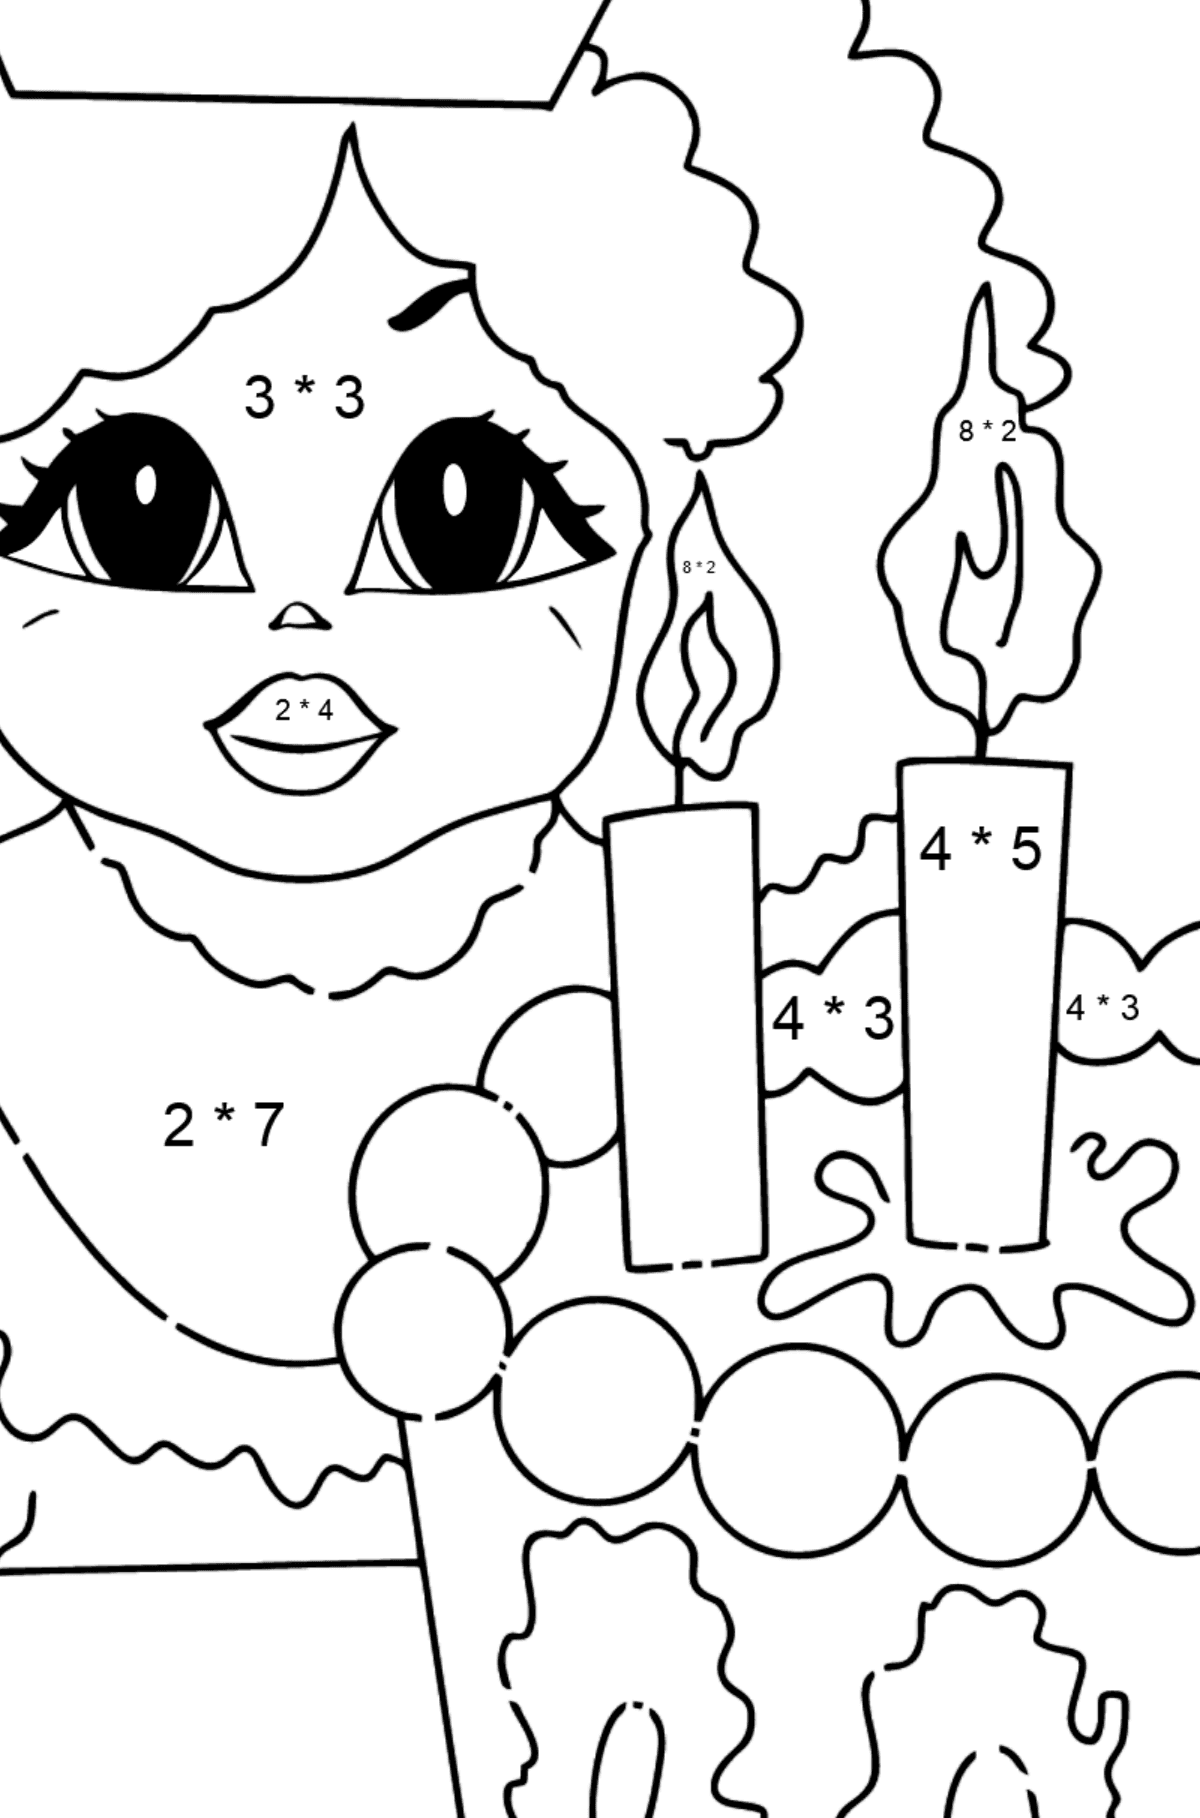 Coloring Page - A Princess with Cake - For Girls - Math Coloring - Multiplication for Kids